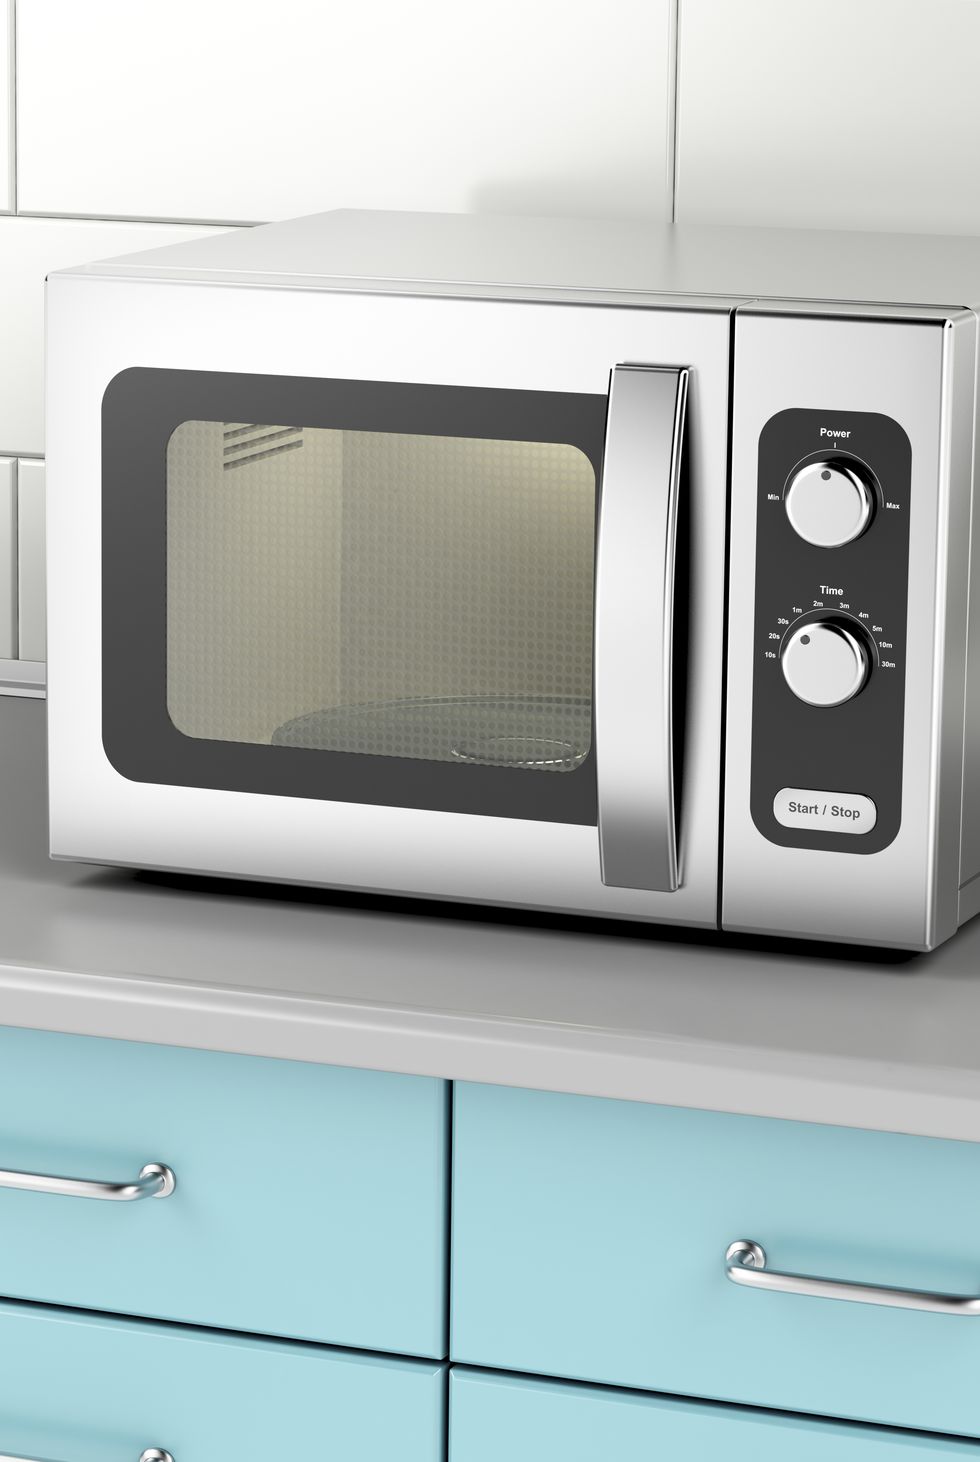 silver microwave oven on light blue counter